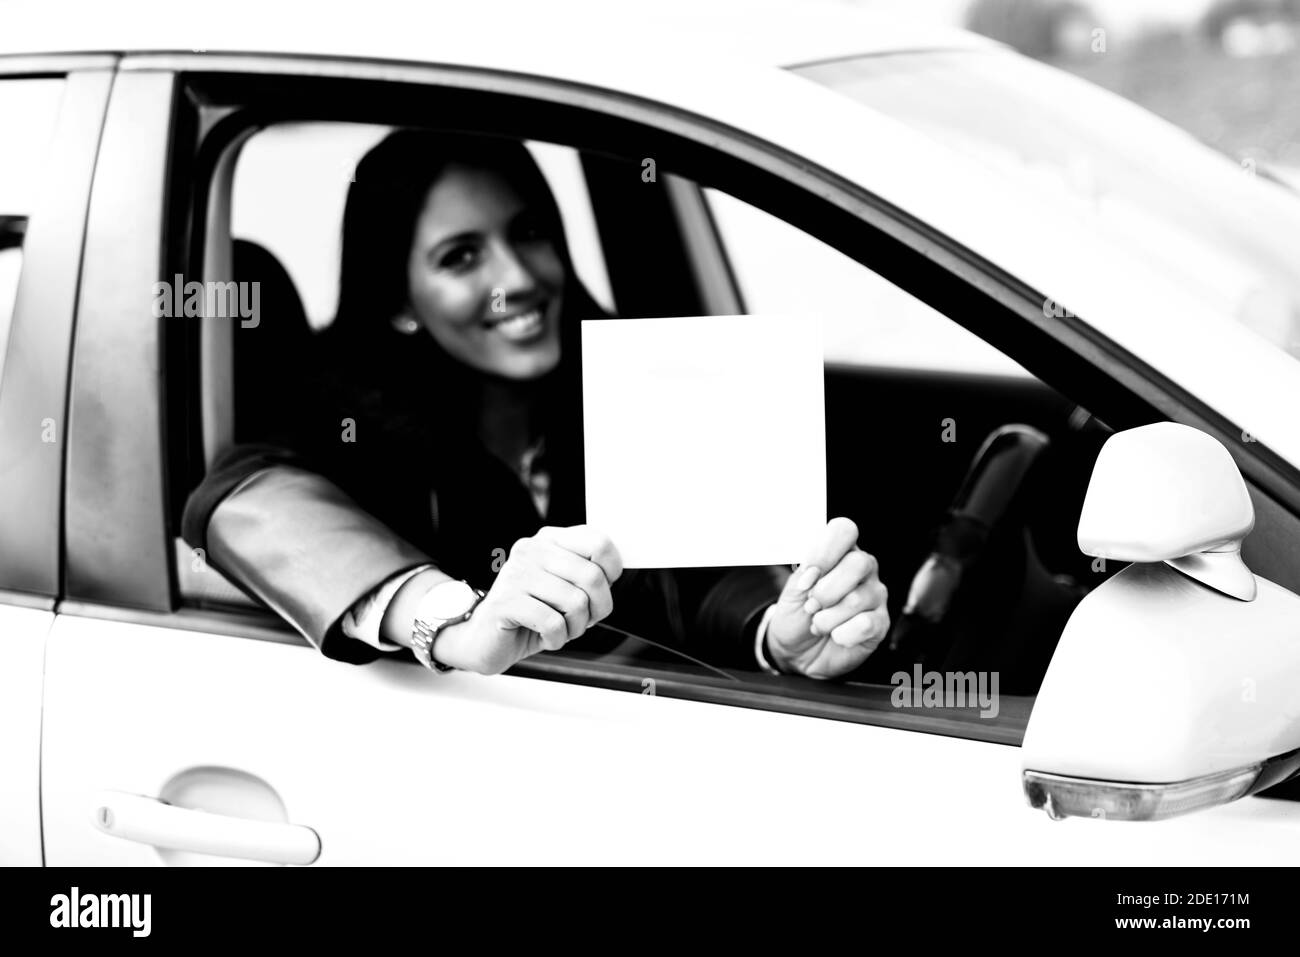 Woman Sitting in the Car and Holding a White Blank Poster - Attractive Girl With a Clean Sheet of Paper or Your Text Stock Photo